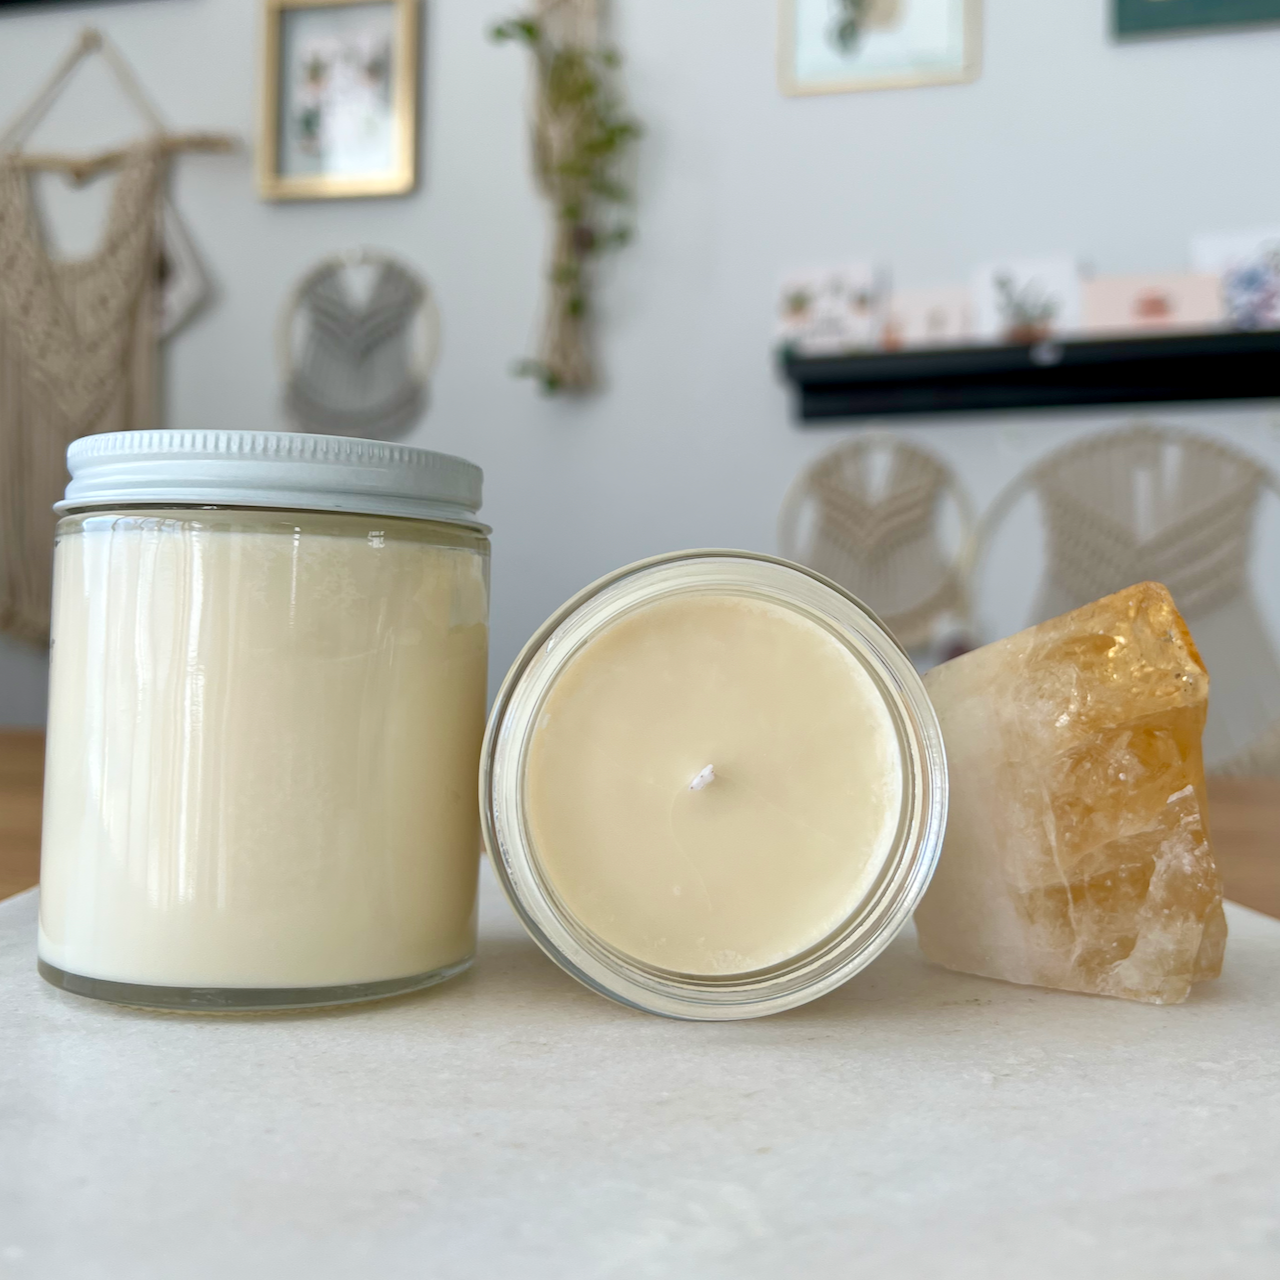 Peppermint & Patchouli Aromatherapy Candle